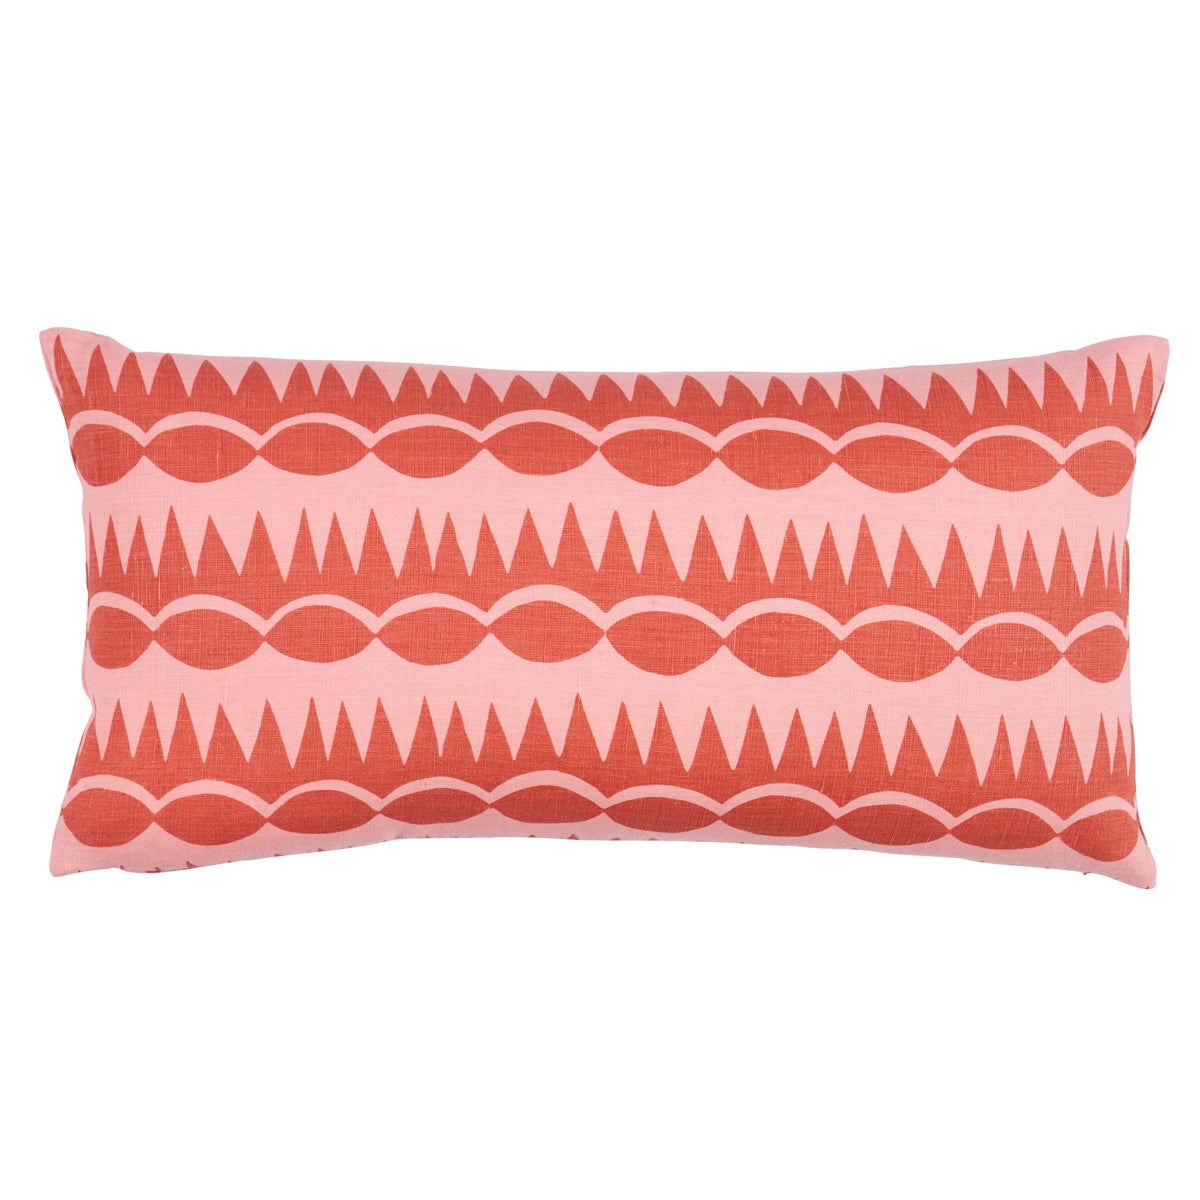 Dagger Stripe Pillow in Red on Pink, 24x12" For Sale